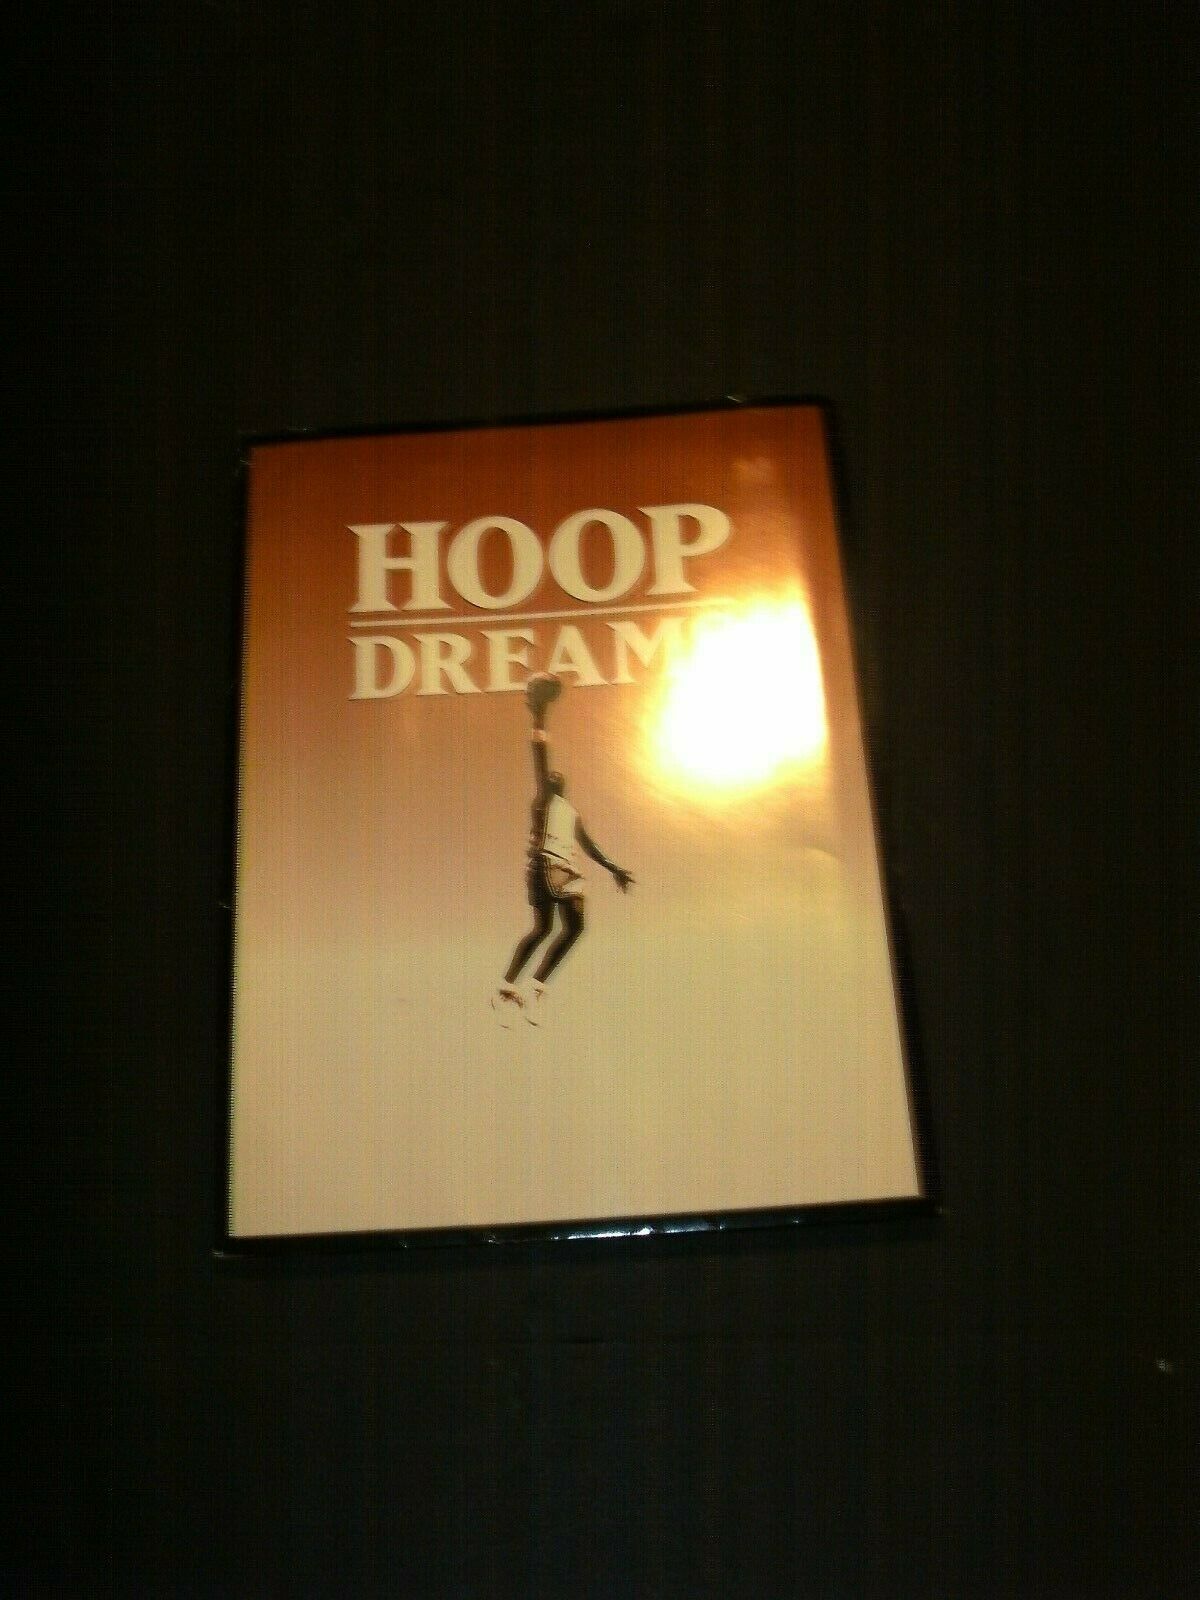 Pbs Hoop Dreams Documentary Film Official Press Kit Complete W/ Glossy Photos